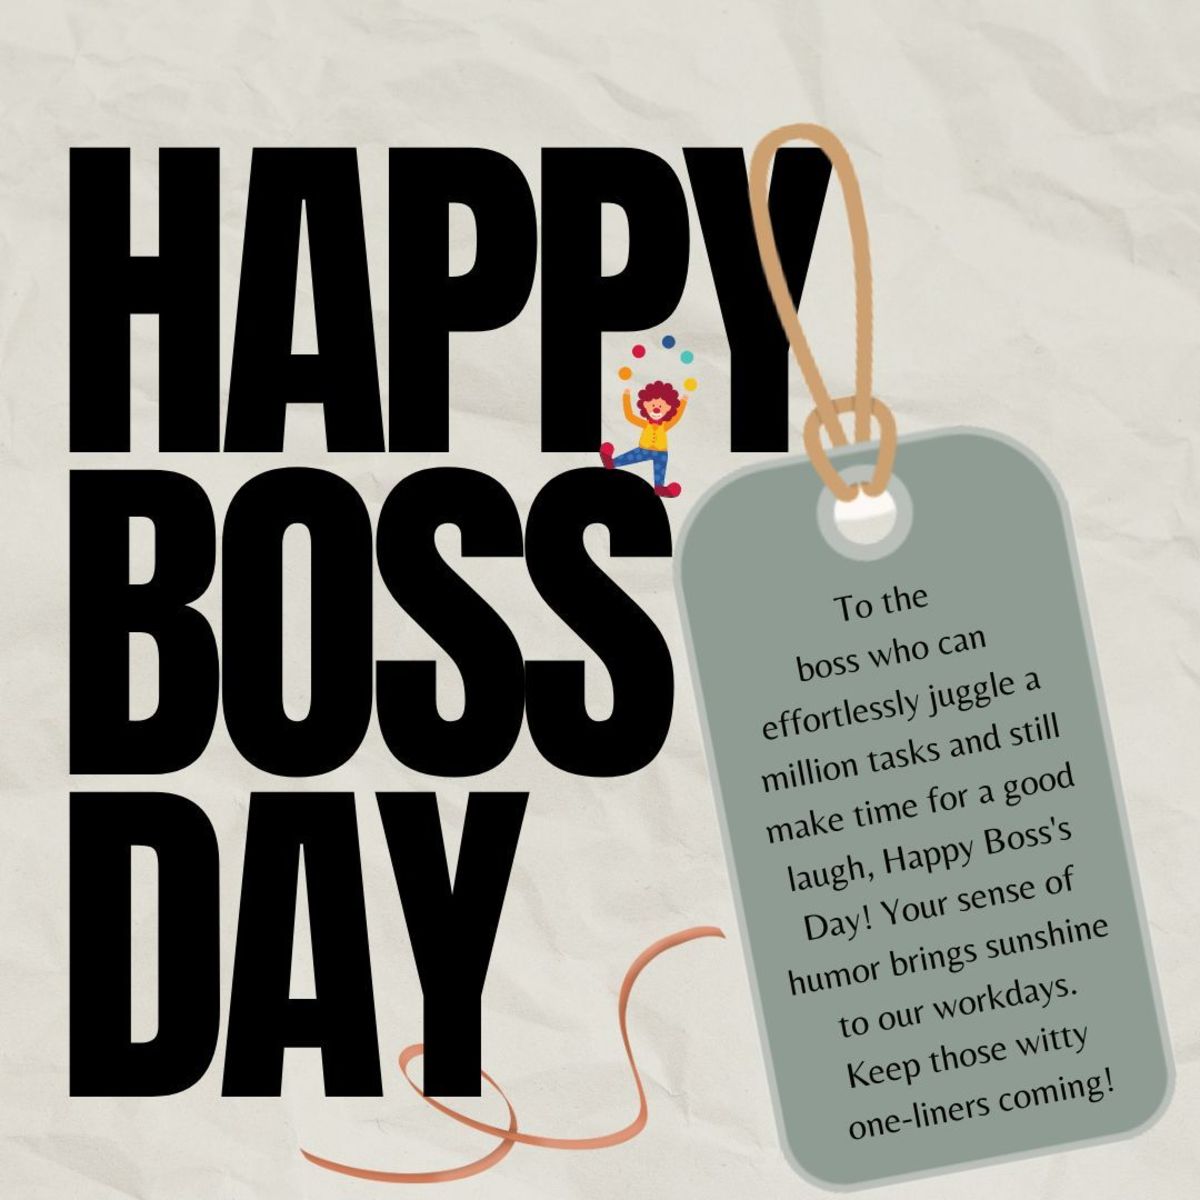 Best Happy Boss Day Message, Even If You Dislike Your Boss - HubPages